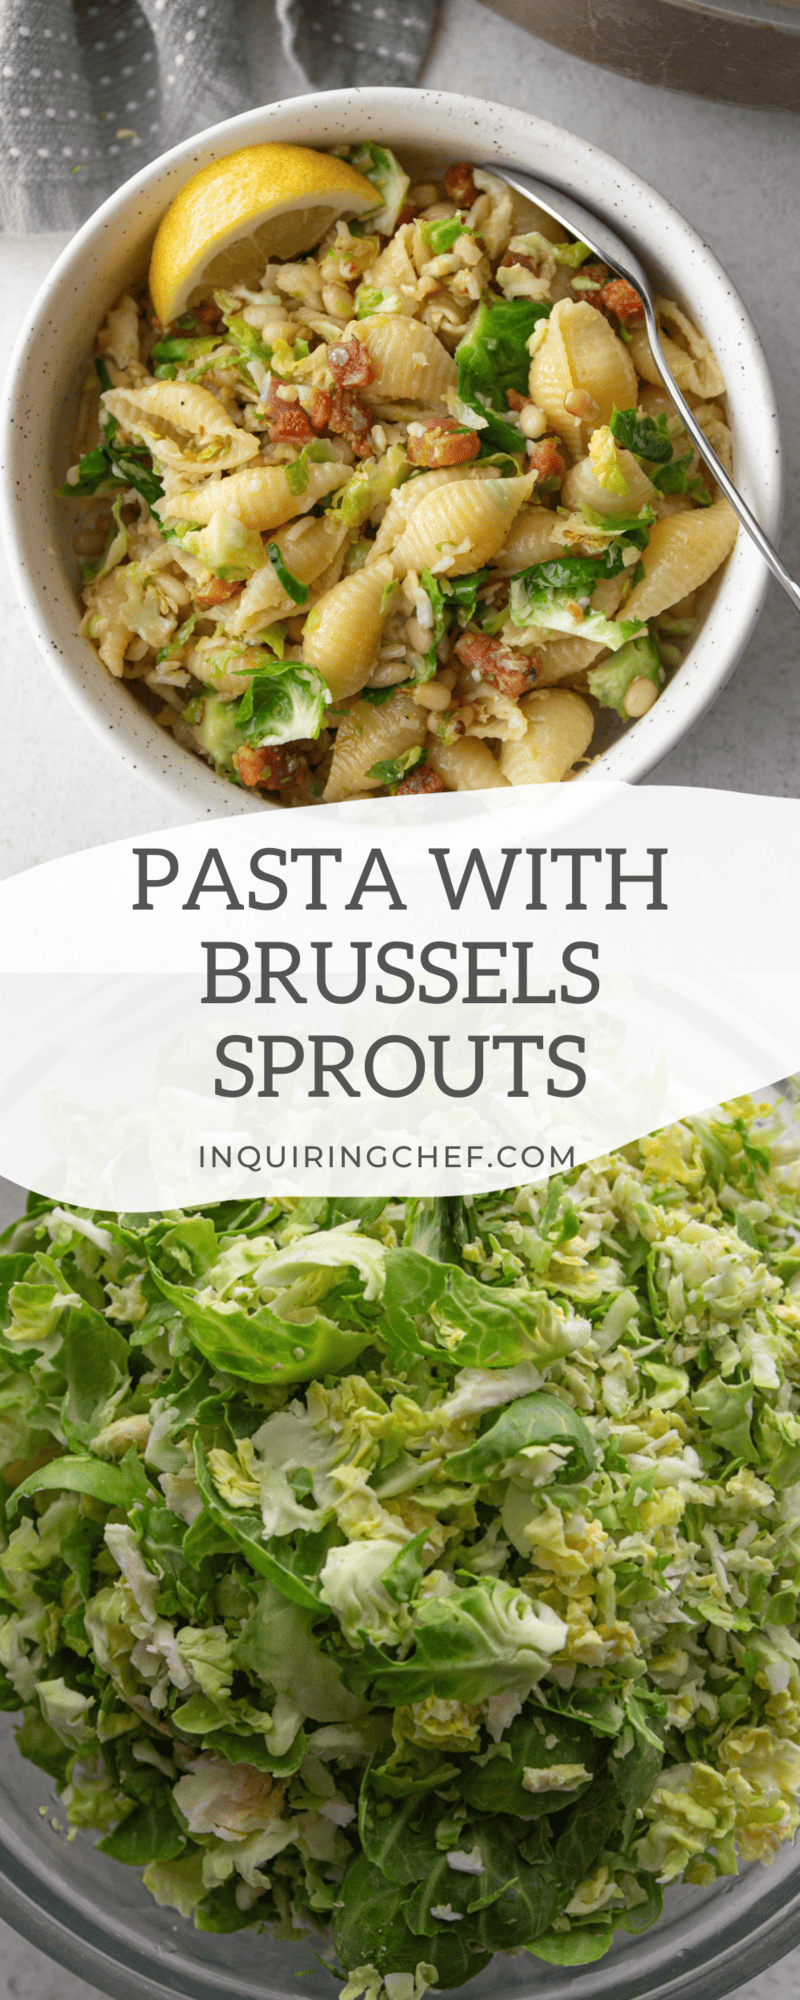 pasta with brussels sprouts